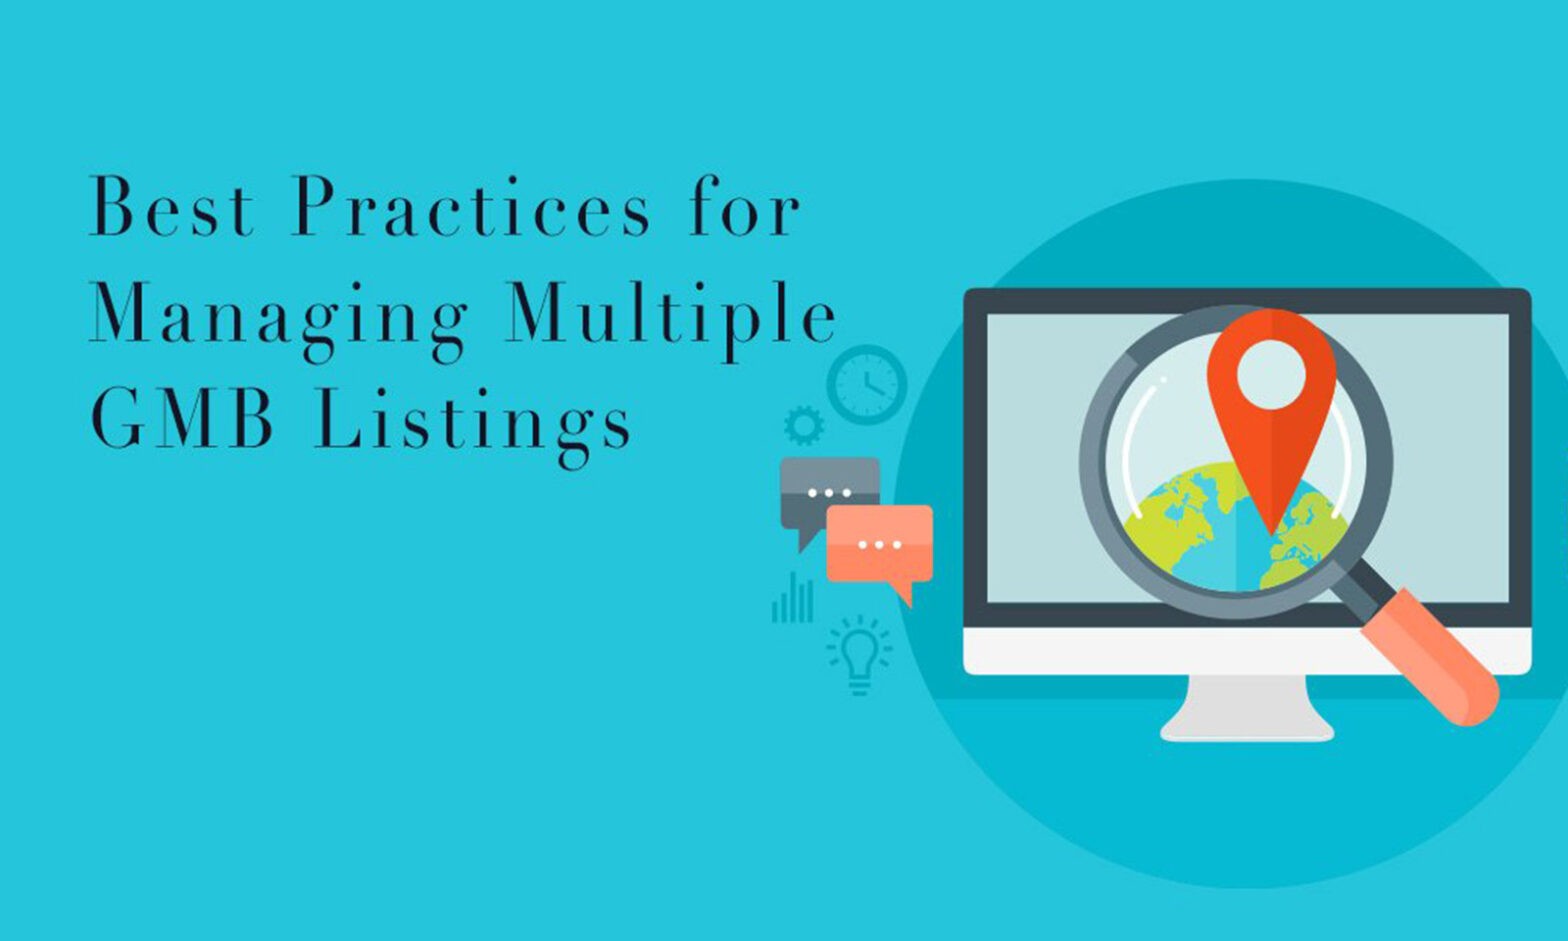 Best Practices for Managing Multiple GBP Listings